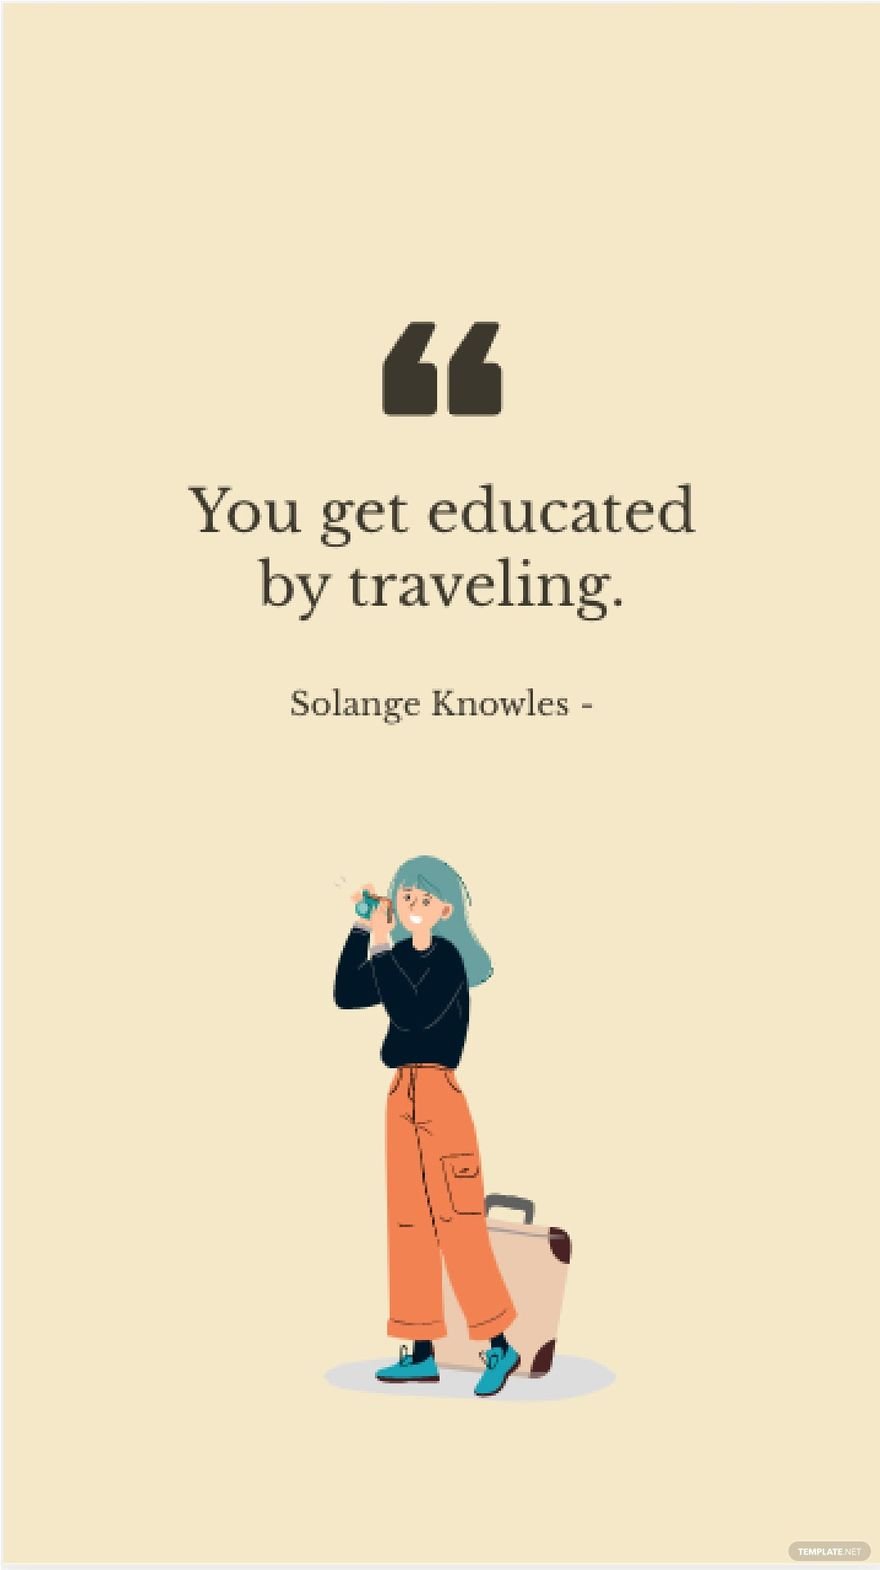 Free Solange Knowles - You get educated by traveling.